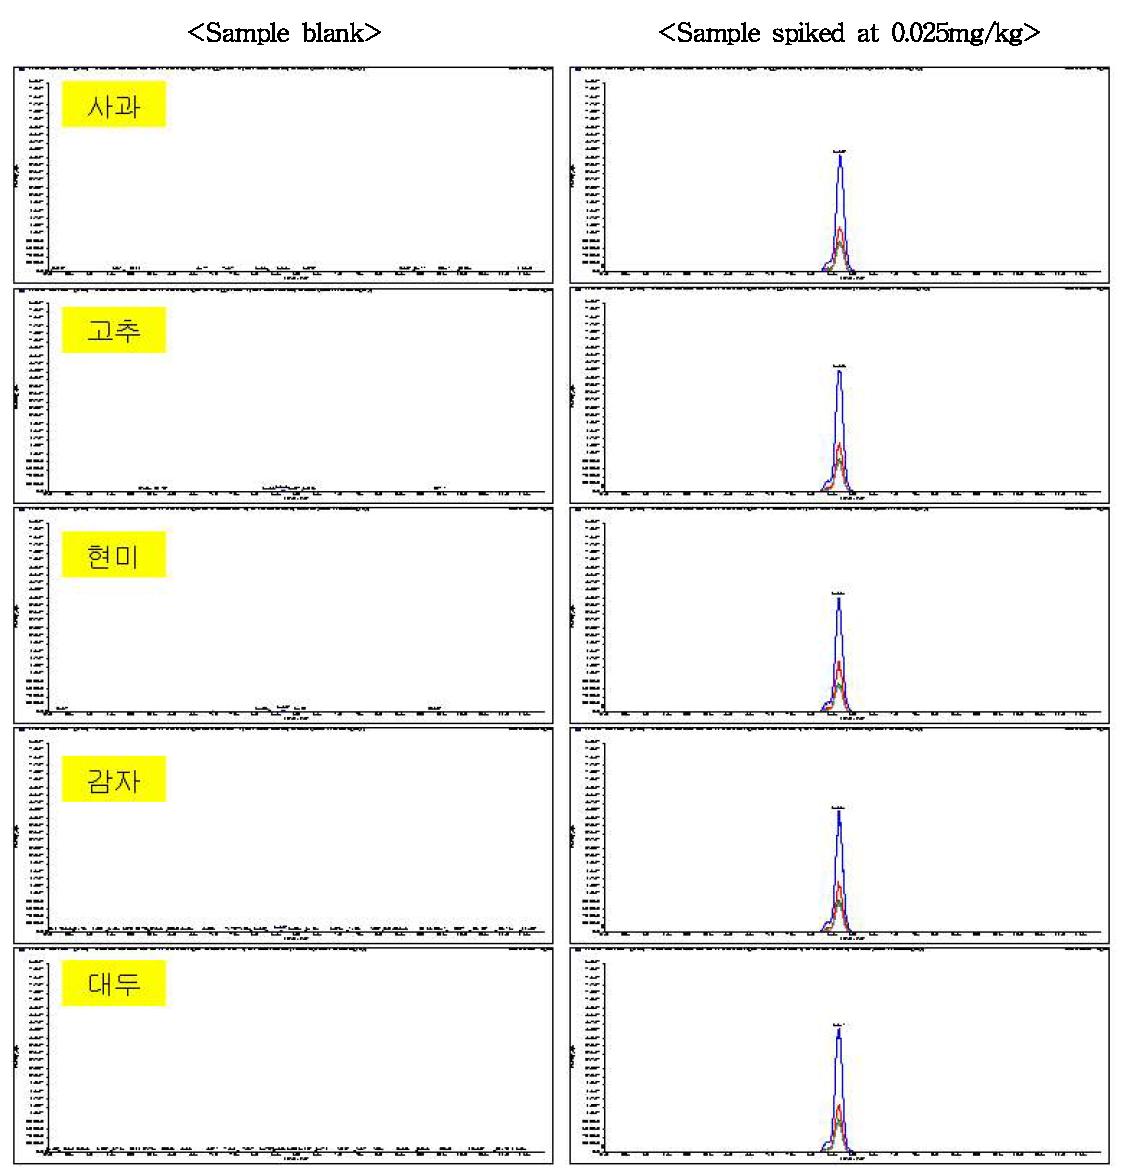 Chromatogram of sample extracts obtained by sample preparation and LC/MS/MS MRM mode analysis at 0.025 mg/kg spiking level